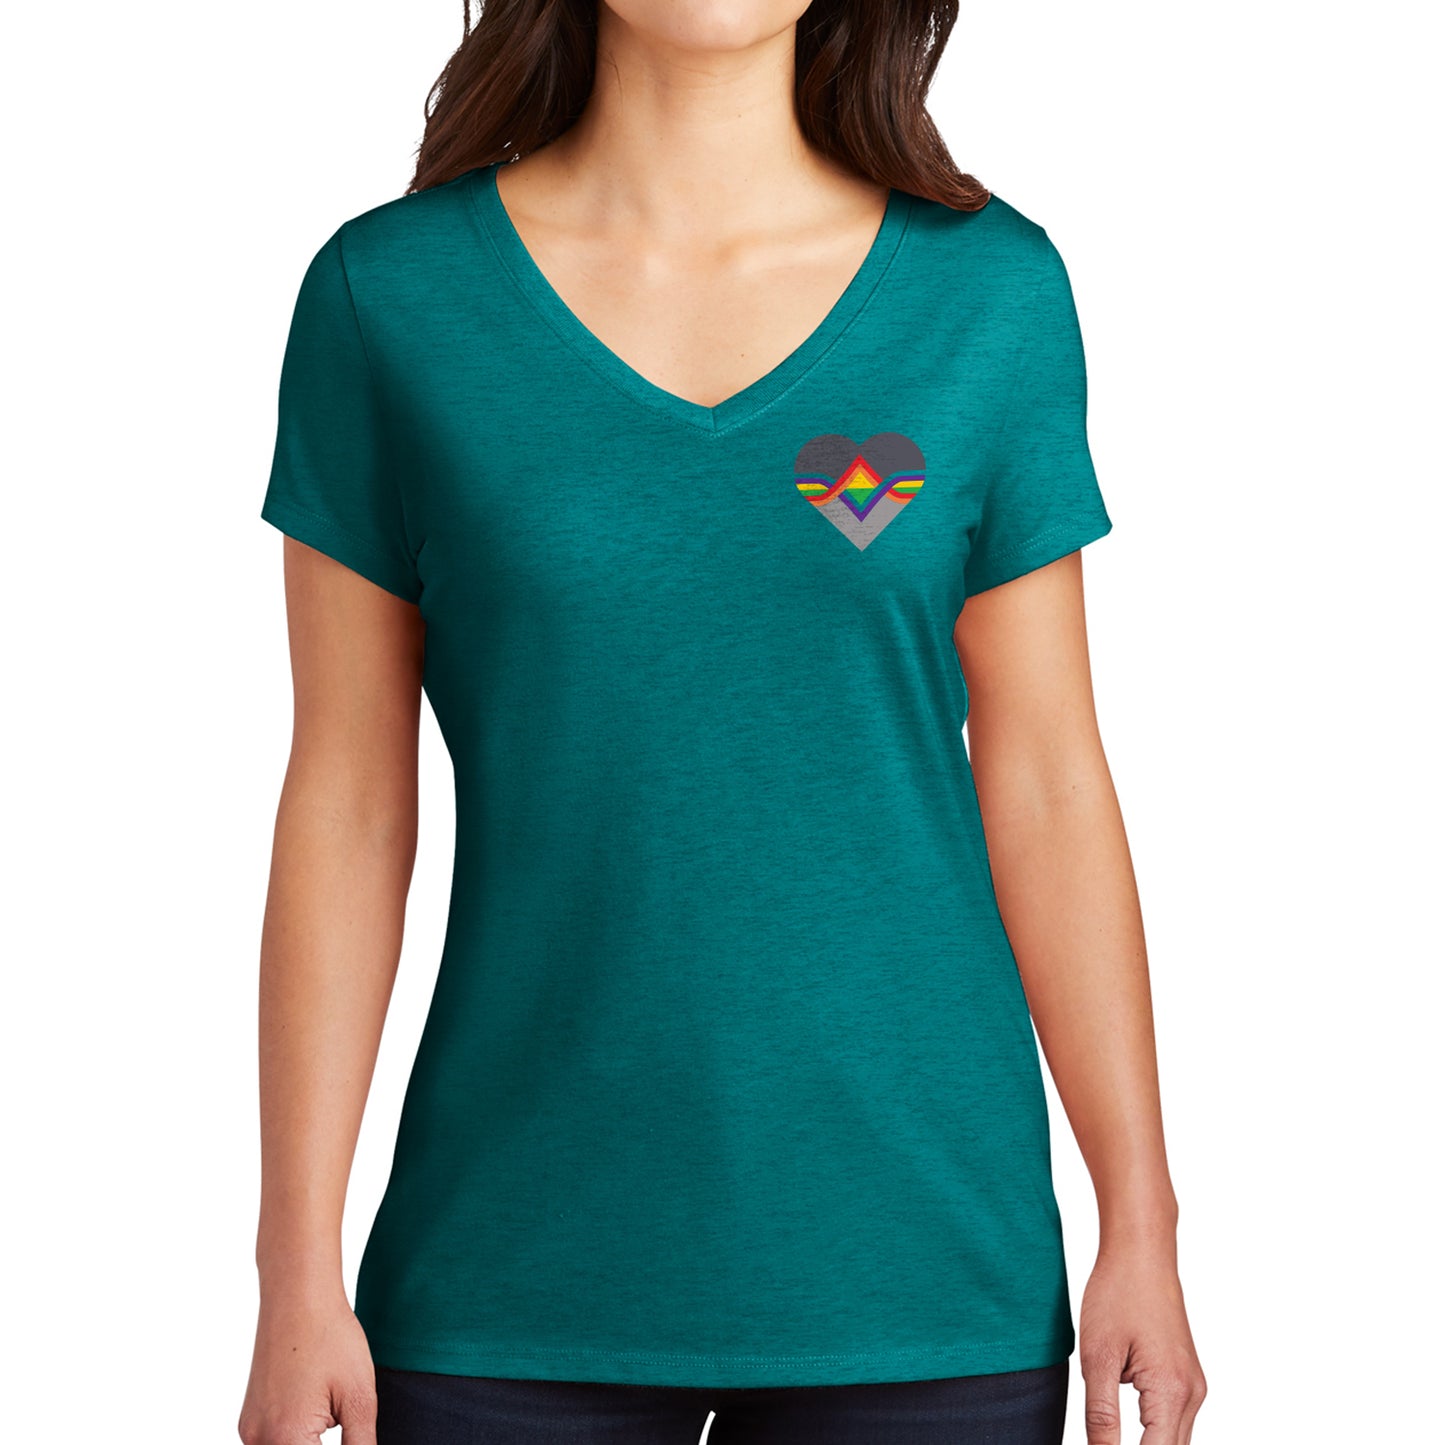 A female model wearing a teal T-shirt. The Acting Ensign Pride symbol is at the top left corner of the shirt.  The symbol is a grey heart with rainbow lines running through the center.